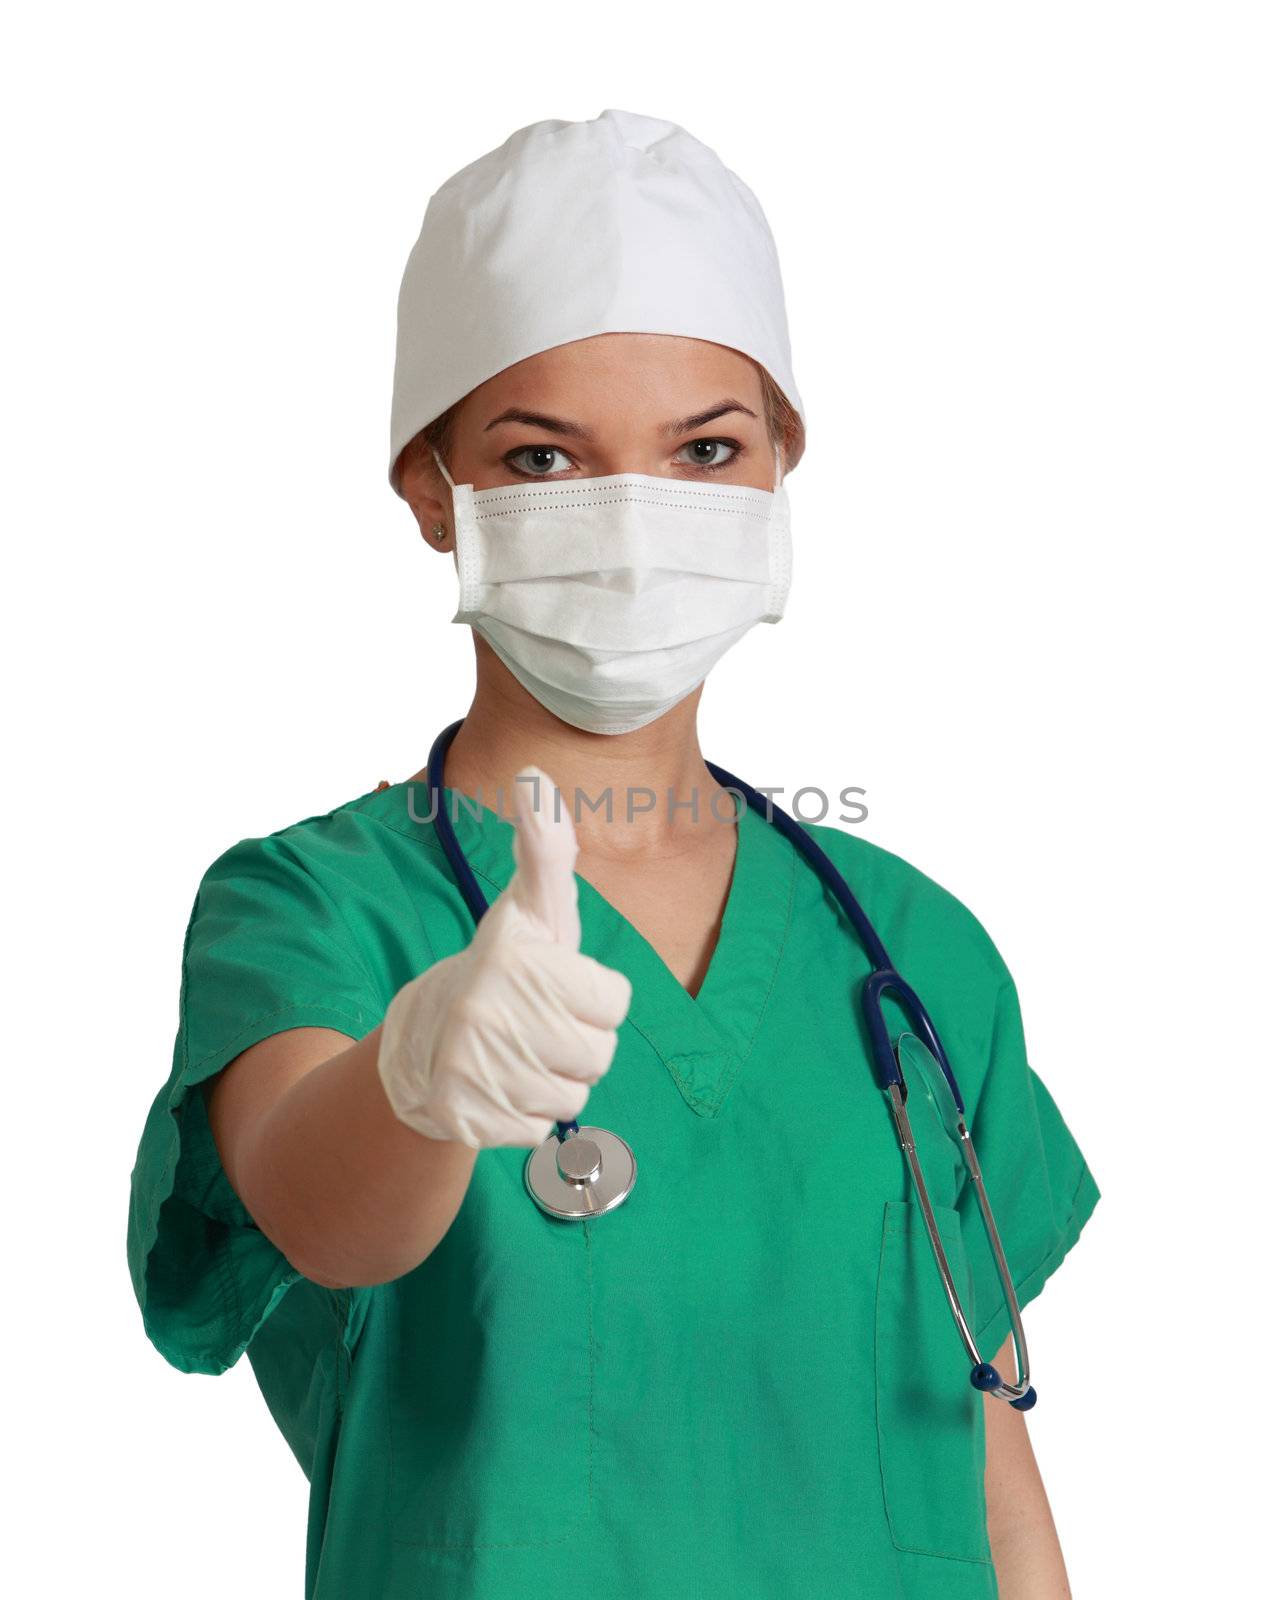 Portrait of a young woman doctor with her right thumb up, isolated against a white background.